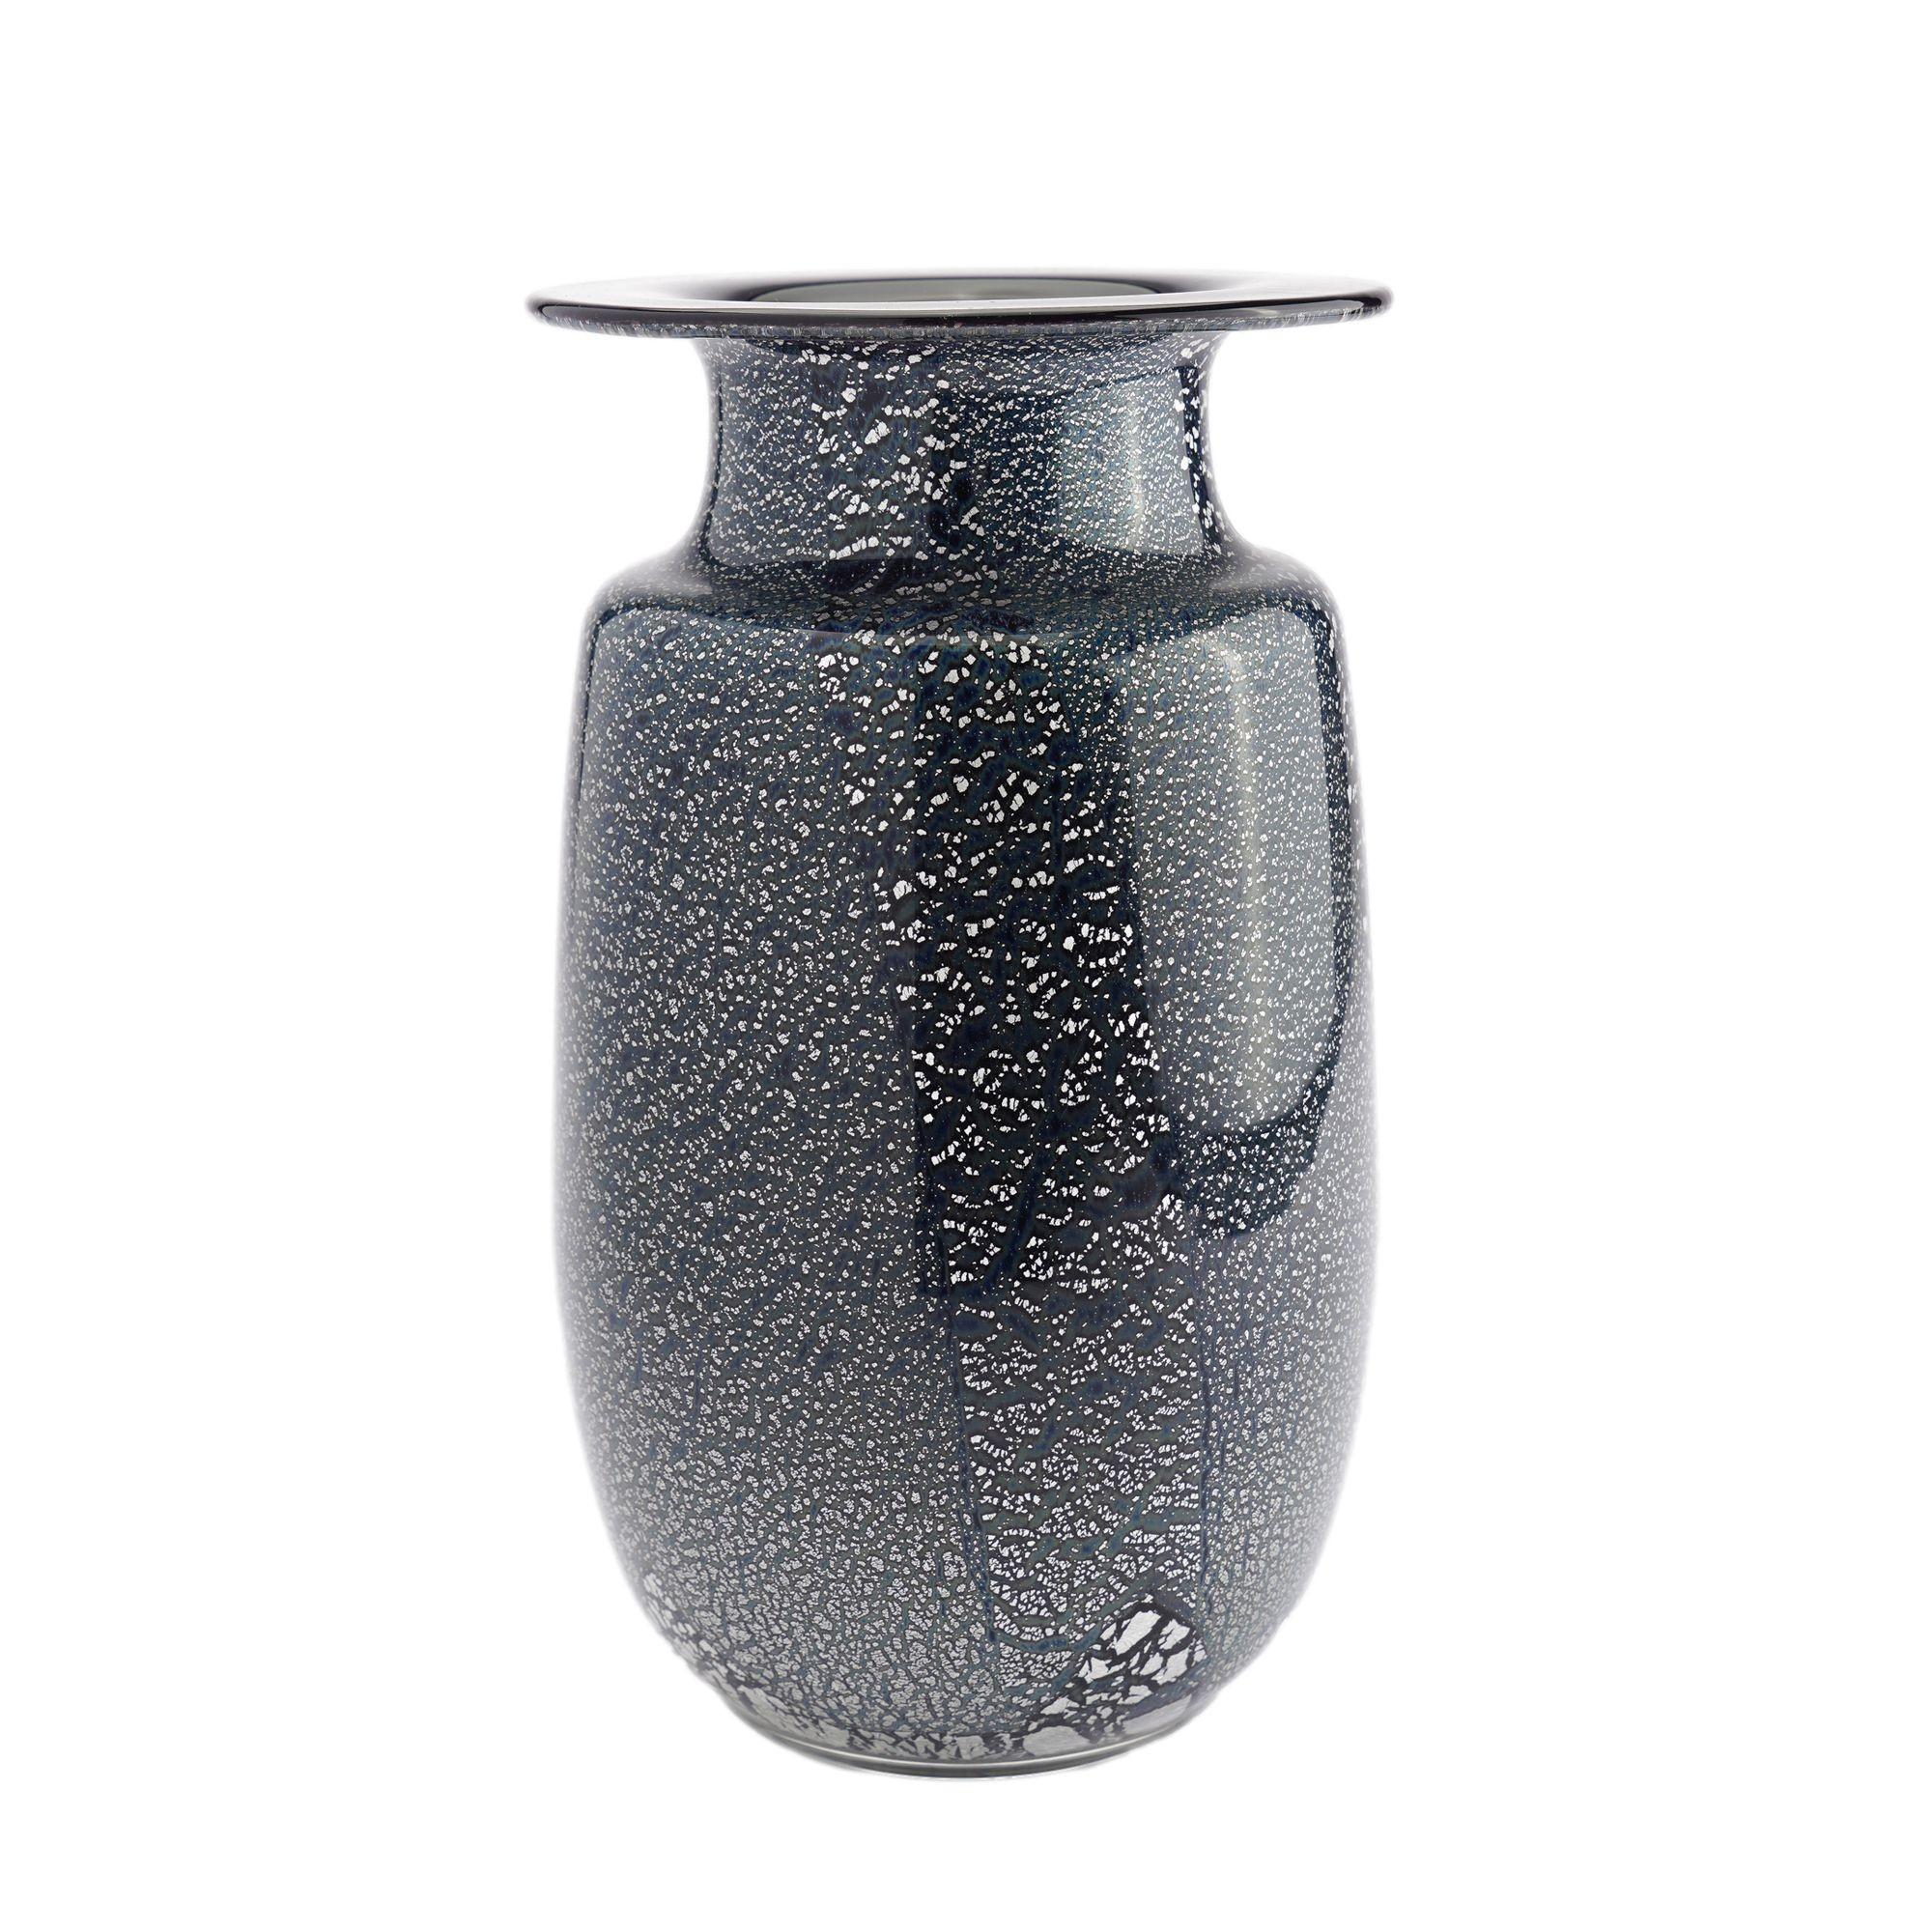 Mouth blown case glass art vase with a waisted standing rim below a flaring lip. The deep slate blue/black glass is infused with silver leaf flecks and encased in clear glass. The underfoot has a ground and polished pontil. 
Murano, Venice, Italy,